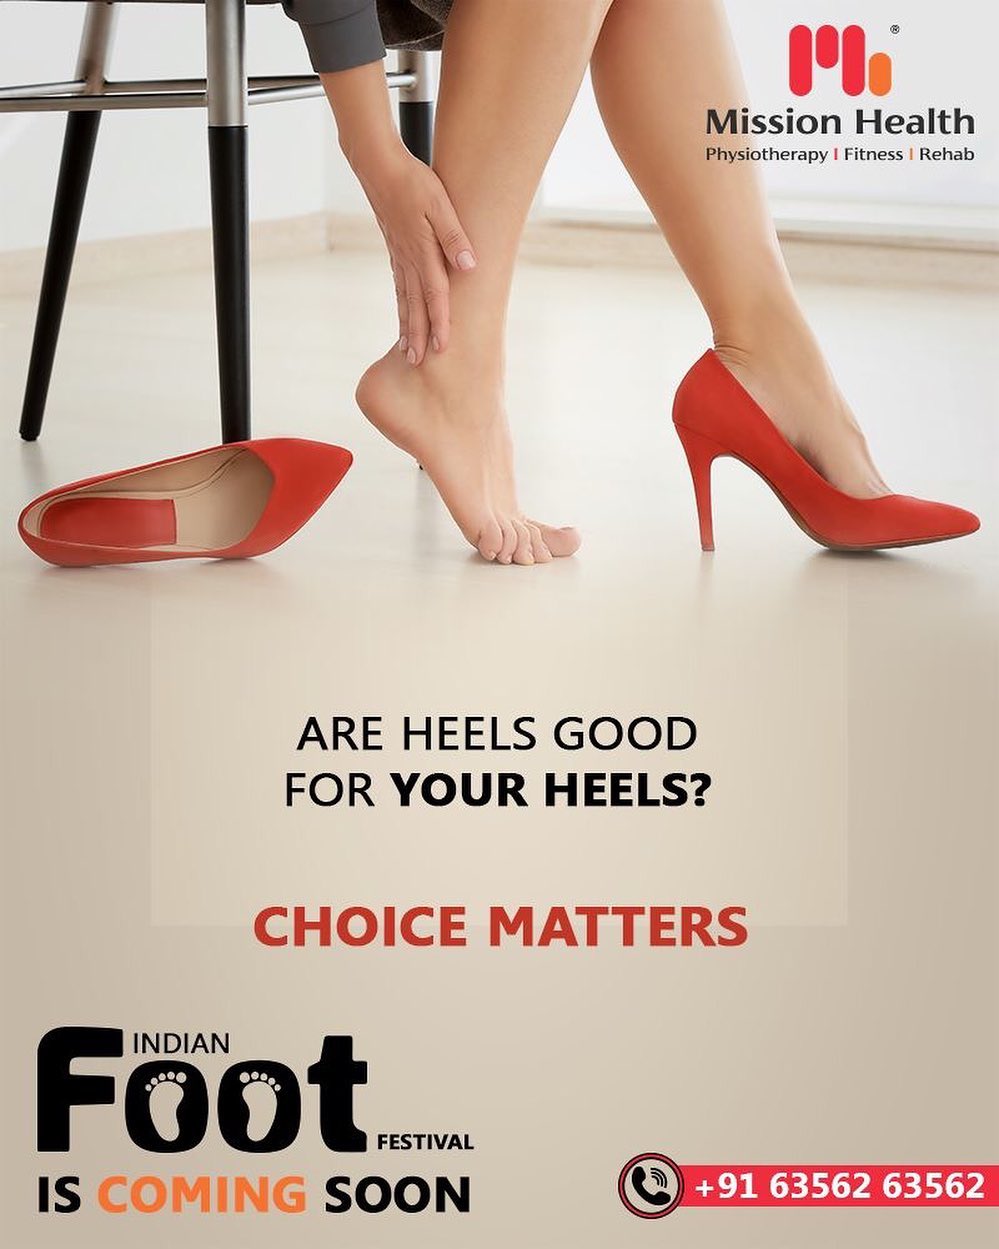 Footwear is surely considered an integral part of one’s Fashion Statement. 
However, have you ever bothered about how your heels affect your feet when you stress them the entire day by wearing high-heeled sandals? 
Many such facts are to be revealed at the First-Ever FOOT Festival in India by Mission Health Super Specialty Spine Clinic and Rehab Centre

The Indian Foot Festival is coming soon... Keep Reading this space for more updates!

Call: +916356263562
Visit: www.missionhealth.co.in

#IndianFootFestival #ComingSoon #FootClinic #footpain #footcare #foothealth #heelpain #anklepain #flatfeet #painrelief #healthyfeet #happyfeet #MissionHealth #MissionHealthIndia #MovementIsLife